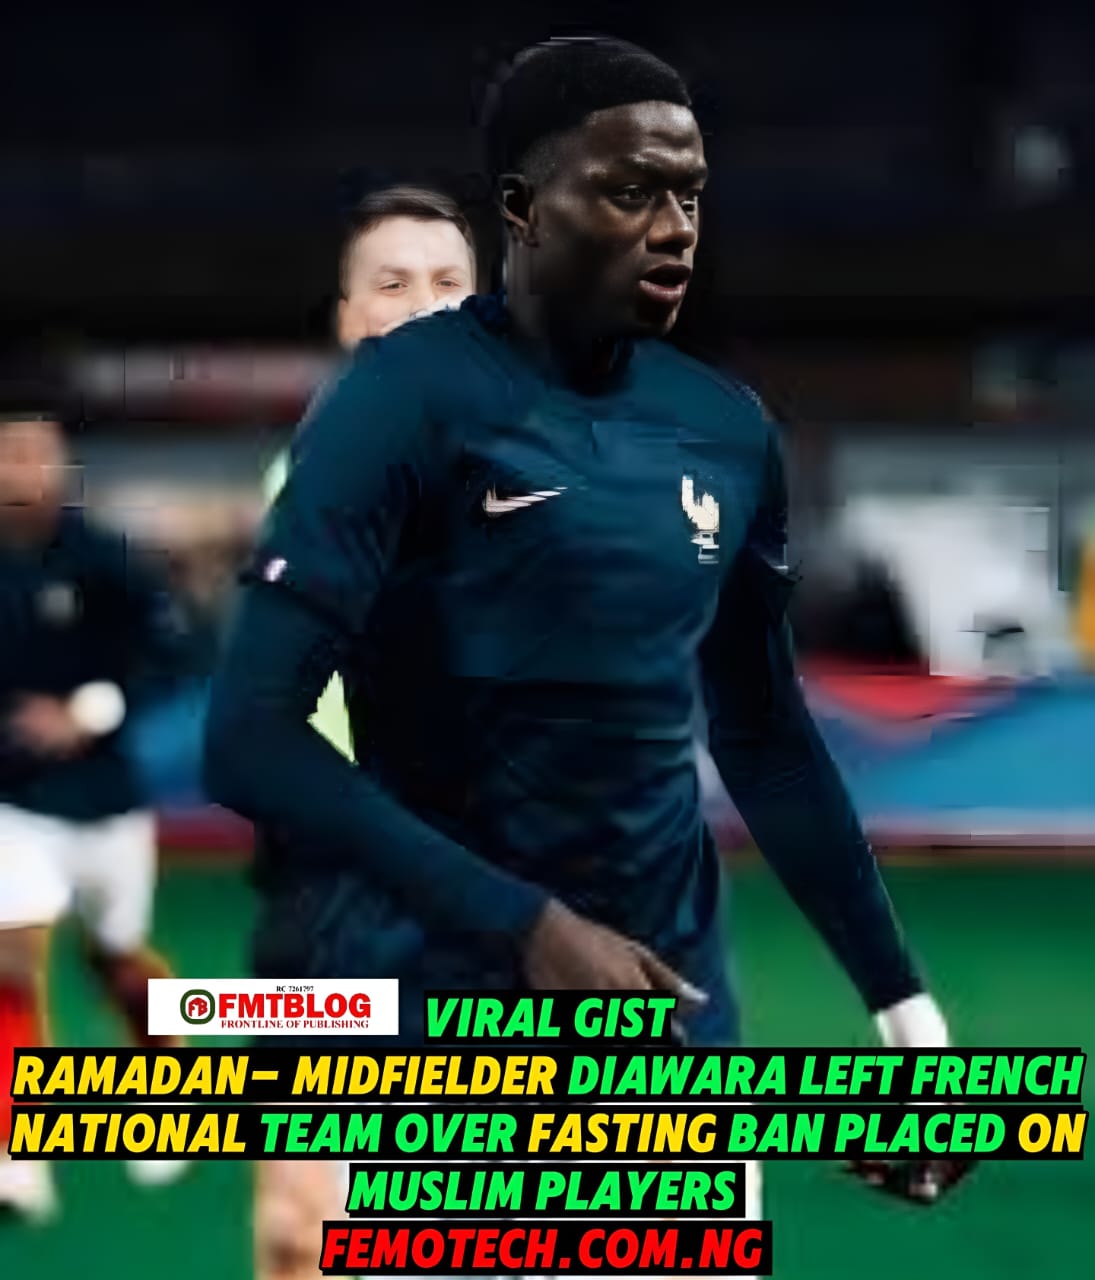 Ramadan- Midfielder Diawara Left French National Team Over Fasting Ban Placed On Muslim Players